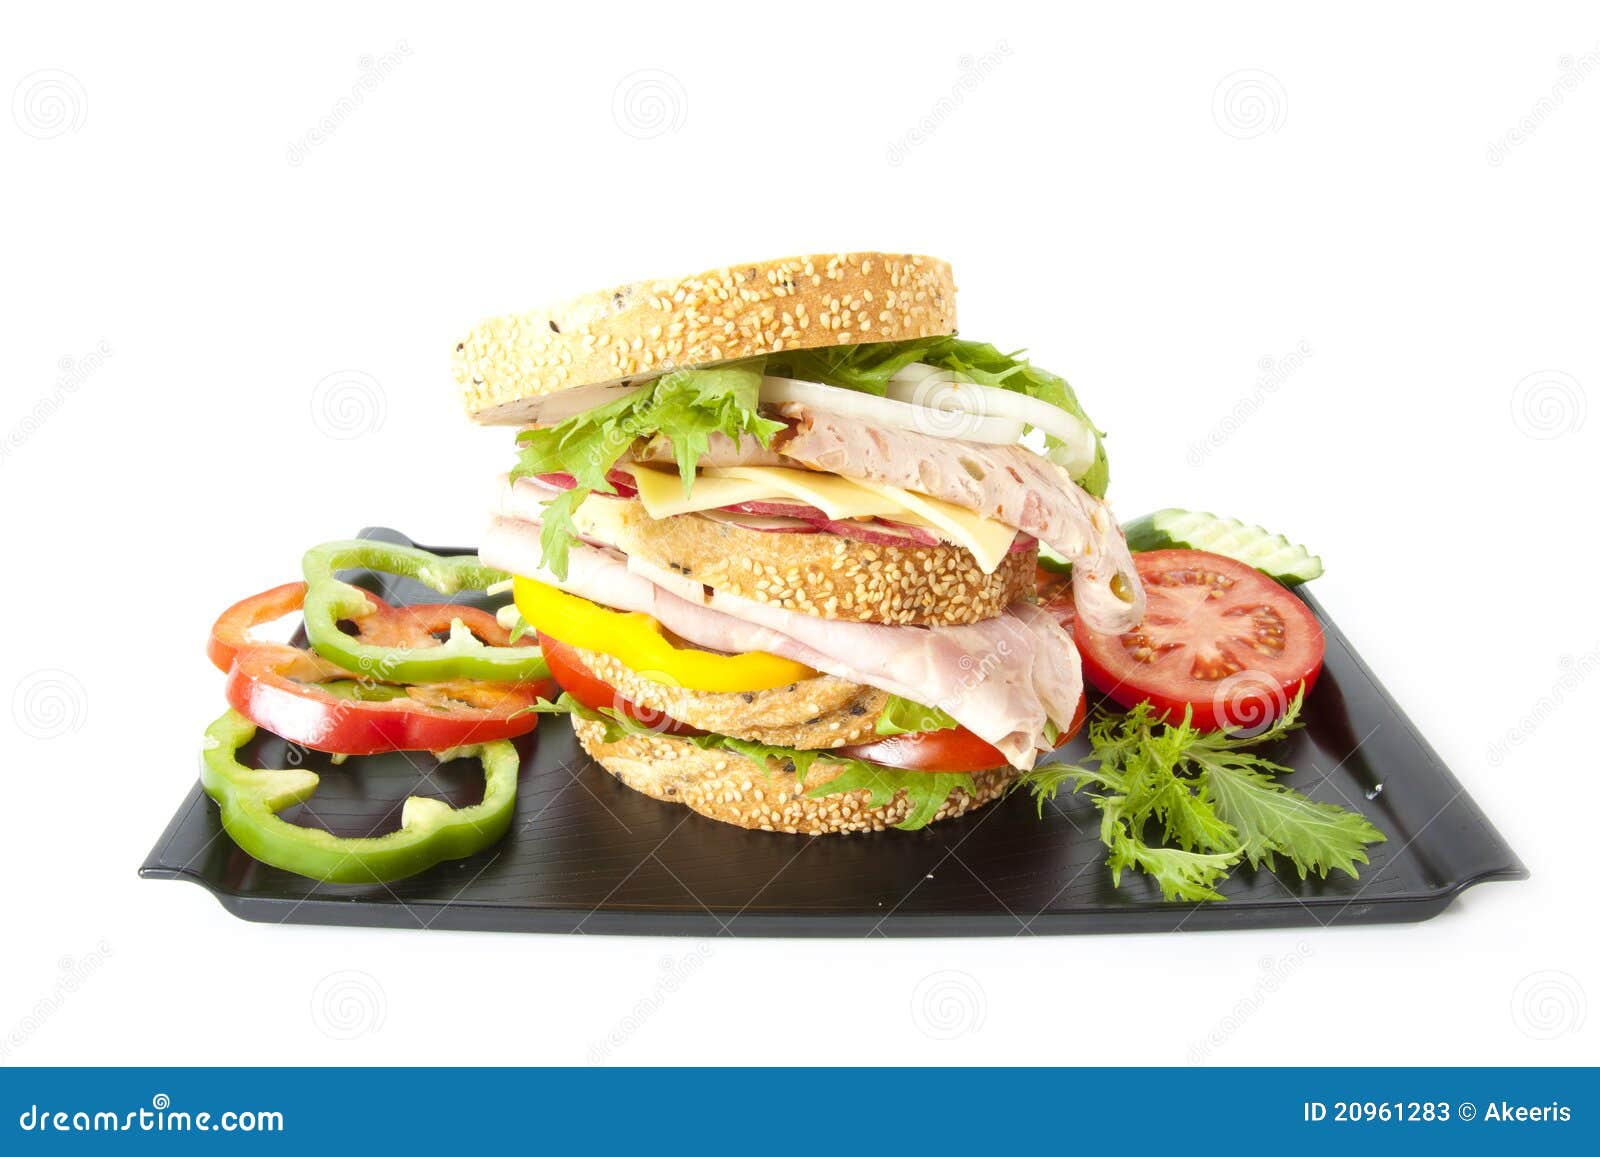 Junk food stock image. Image of grain, green, lunch, healthy - 20961283